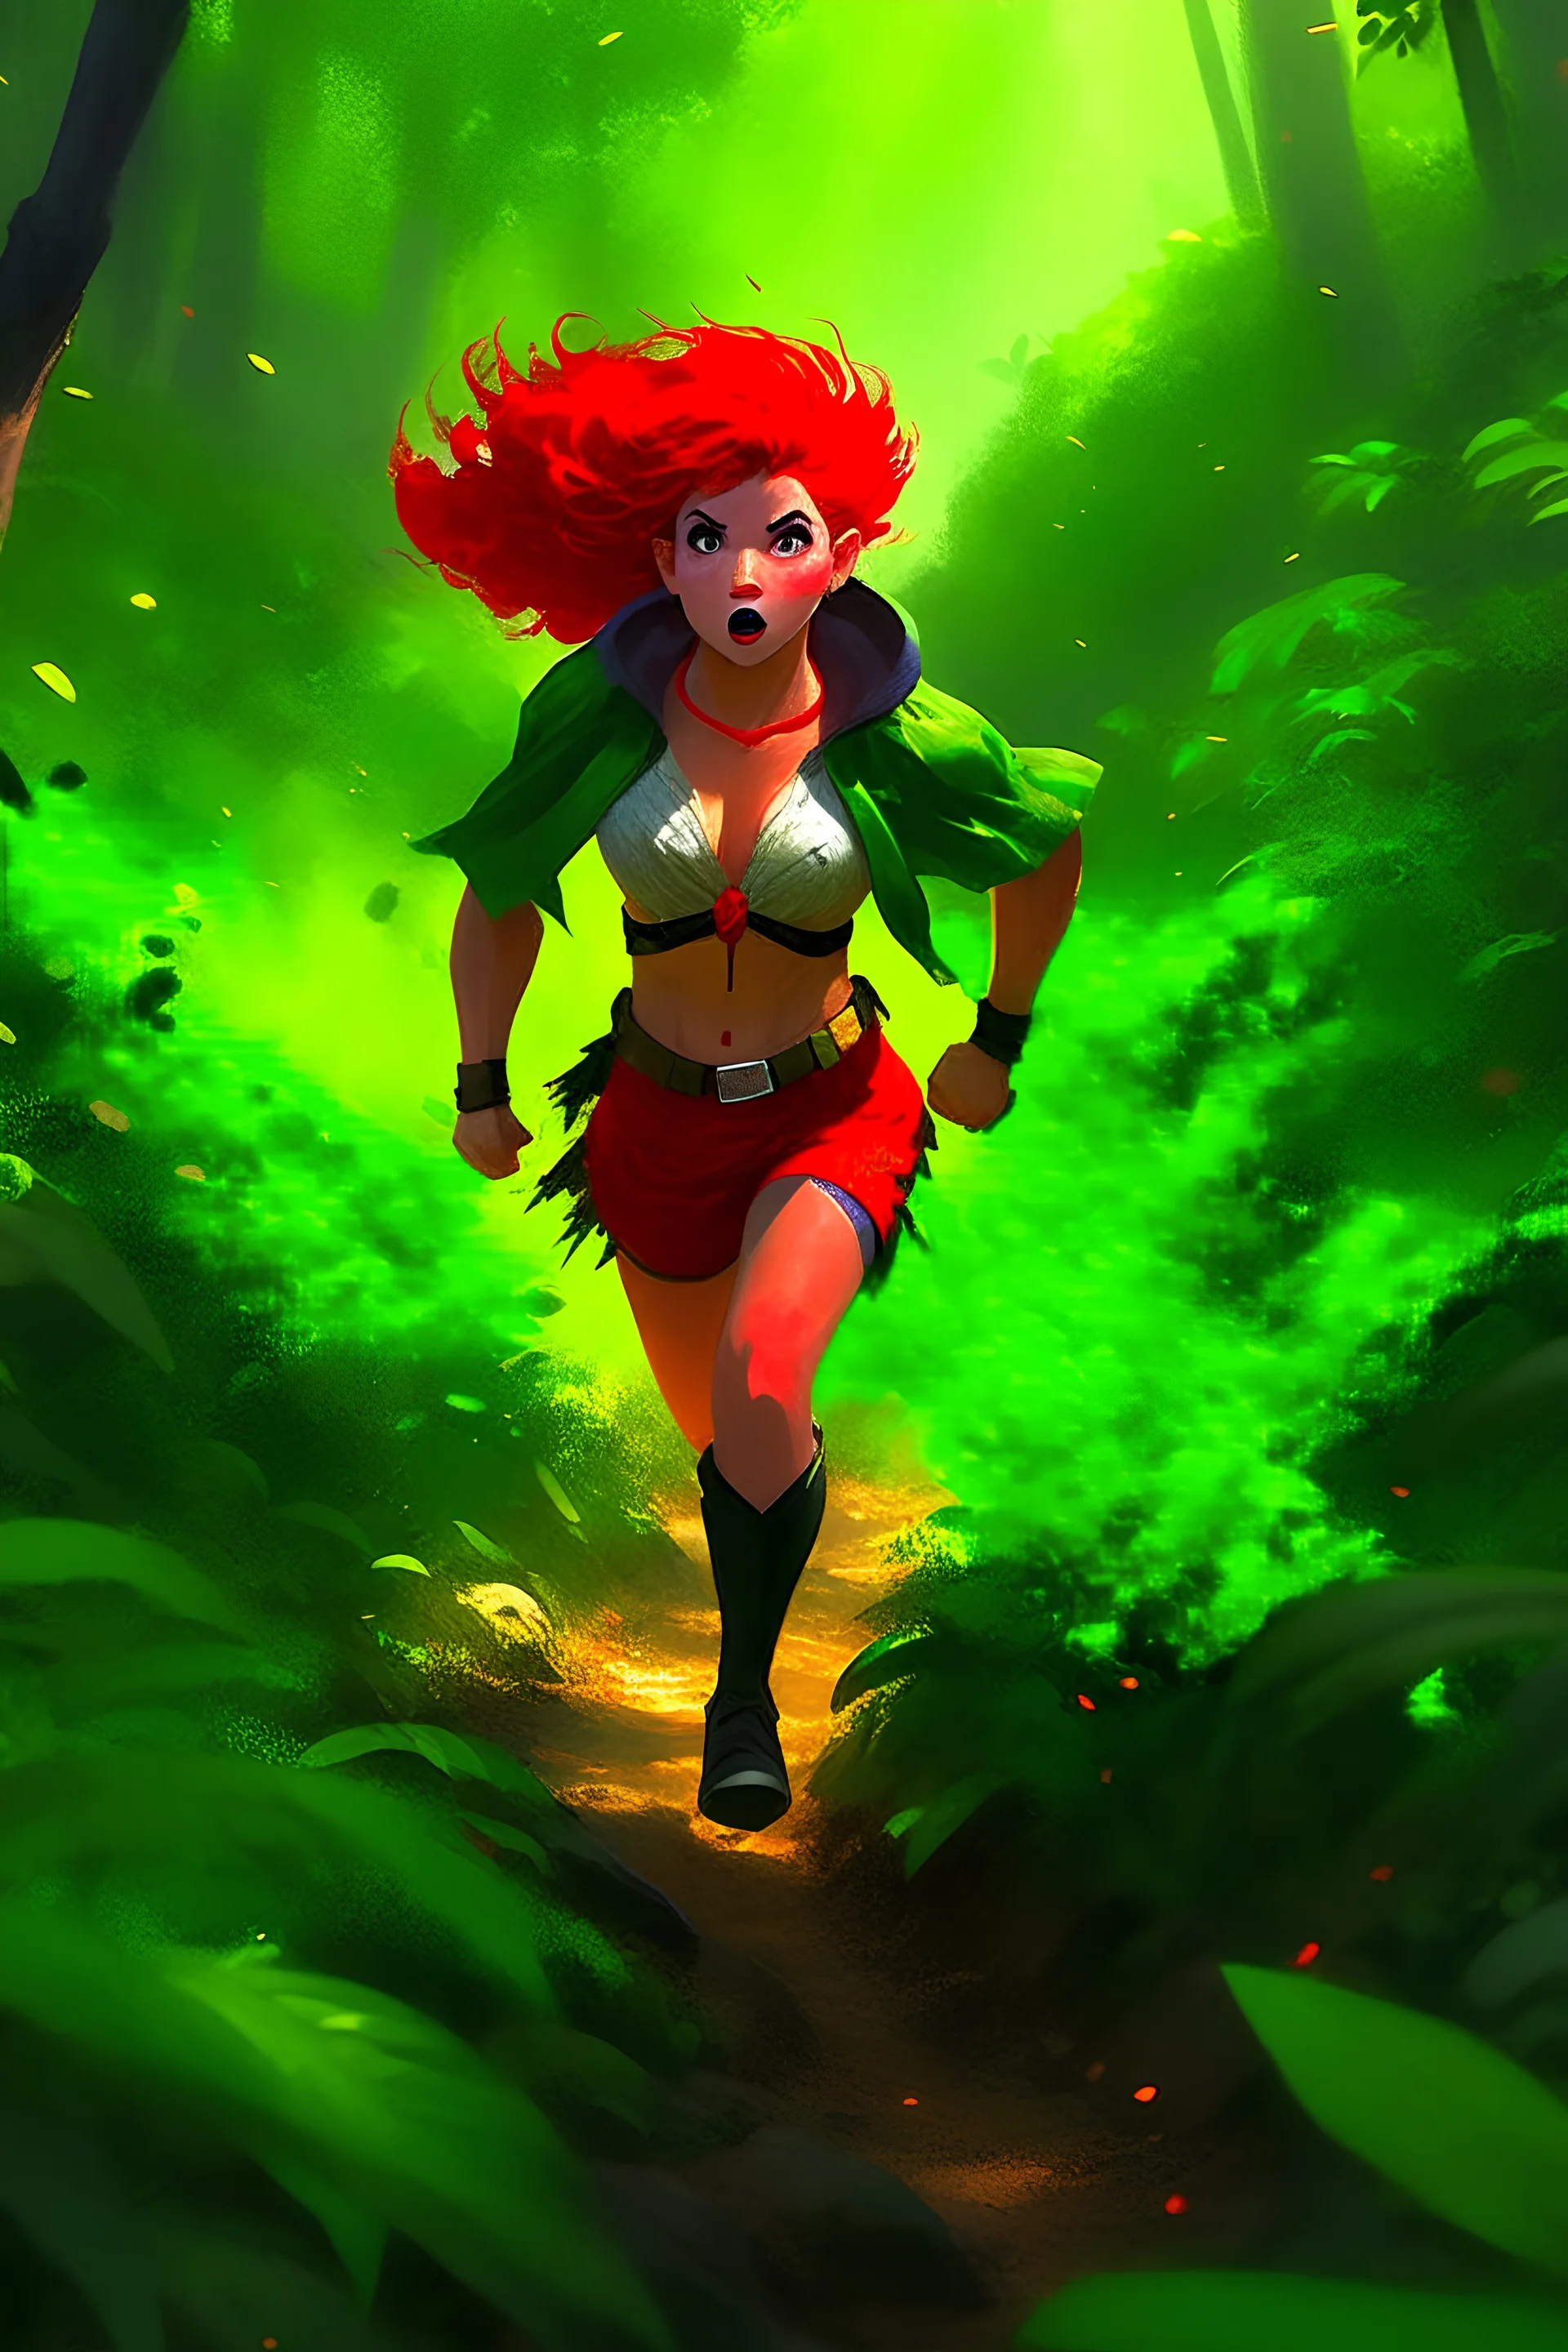 A redheaded superheroine with red cape, torn shirt and ripped shorts running in the jungle.